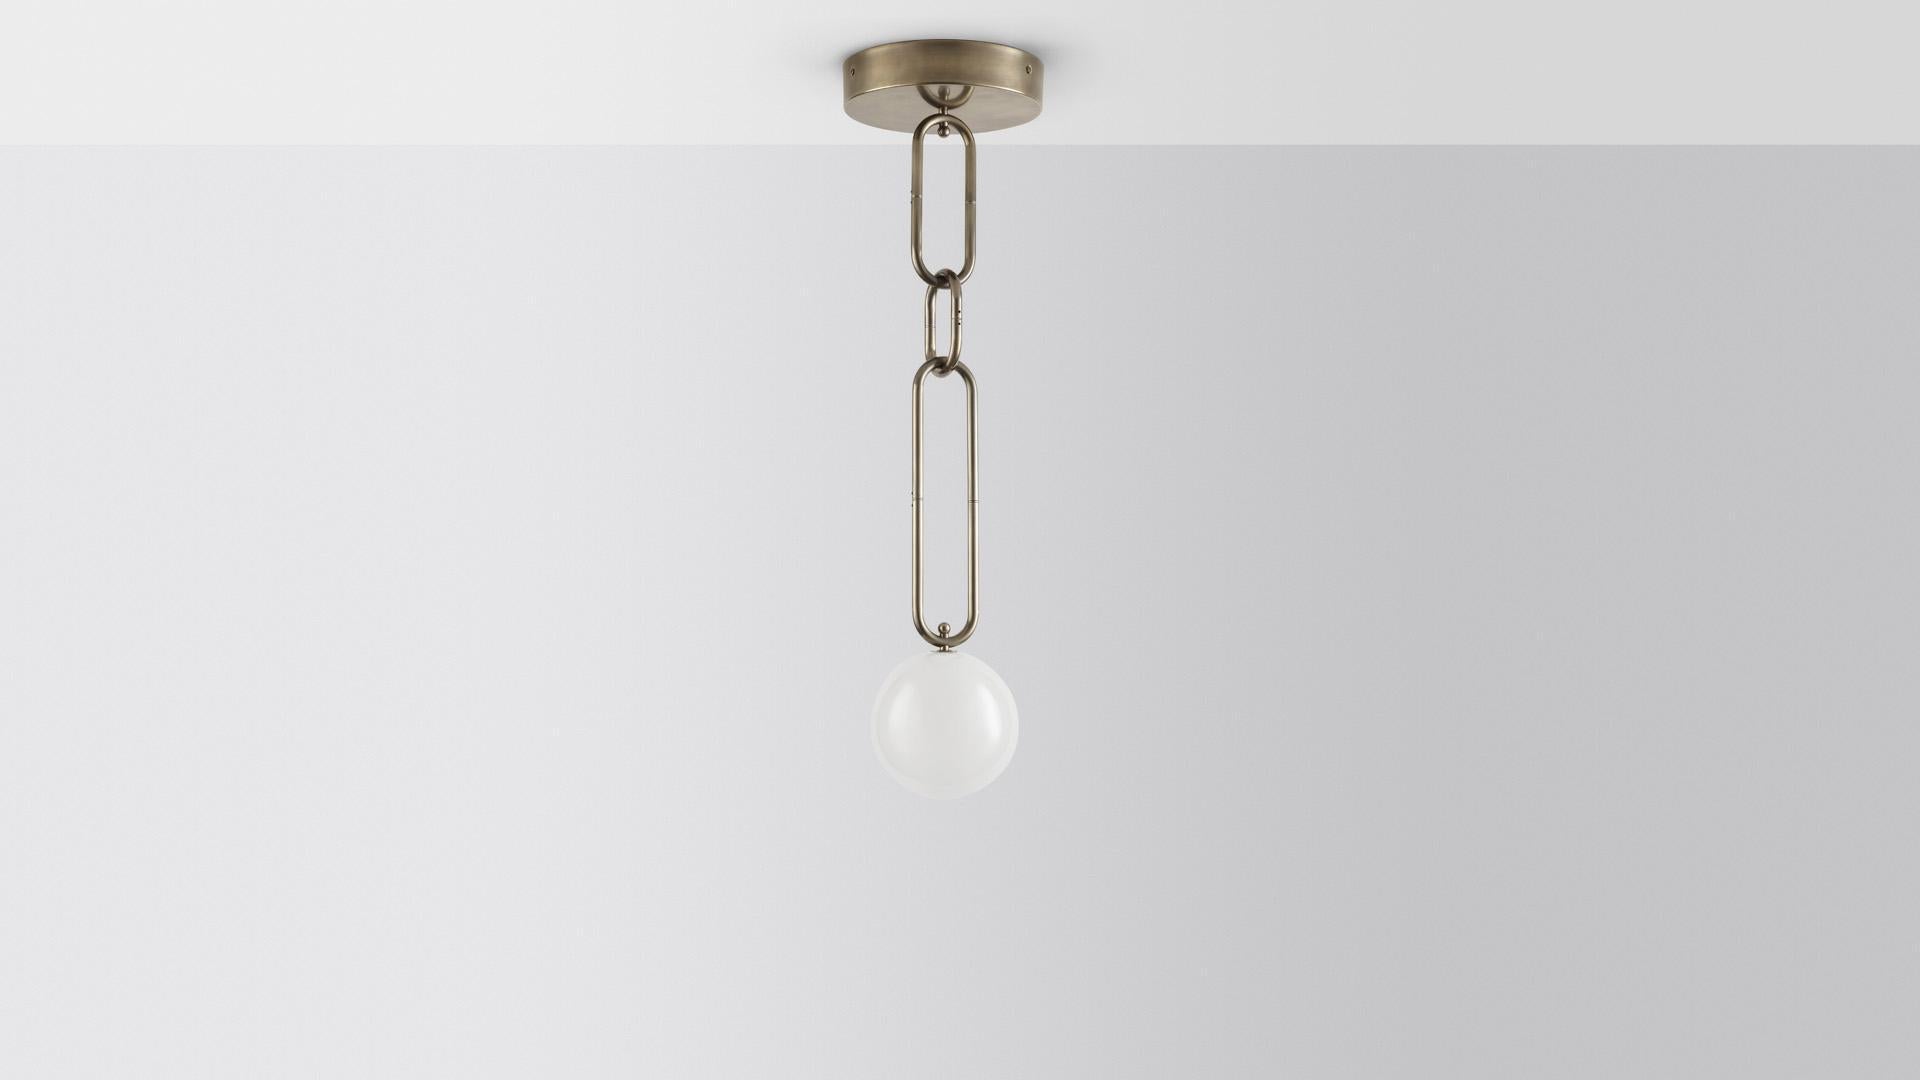 Chain chain chain by Volker Haug
Dimensions: 28 x H minimum 45 cm
Materials: Brass
Finish: Polished, brushed or bronzed brass; enamel or chrome-plated

Lamp: E27, Frosted or Opal LED G95 or G125
Custom finishes available on request.

The U